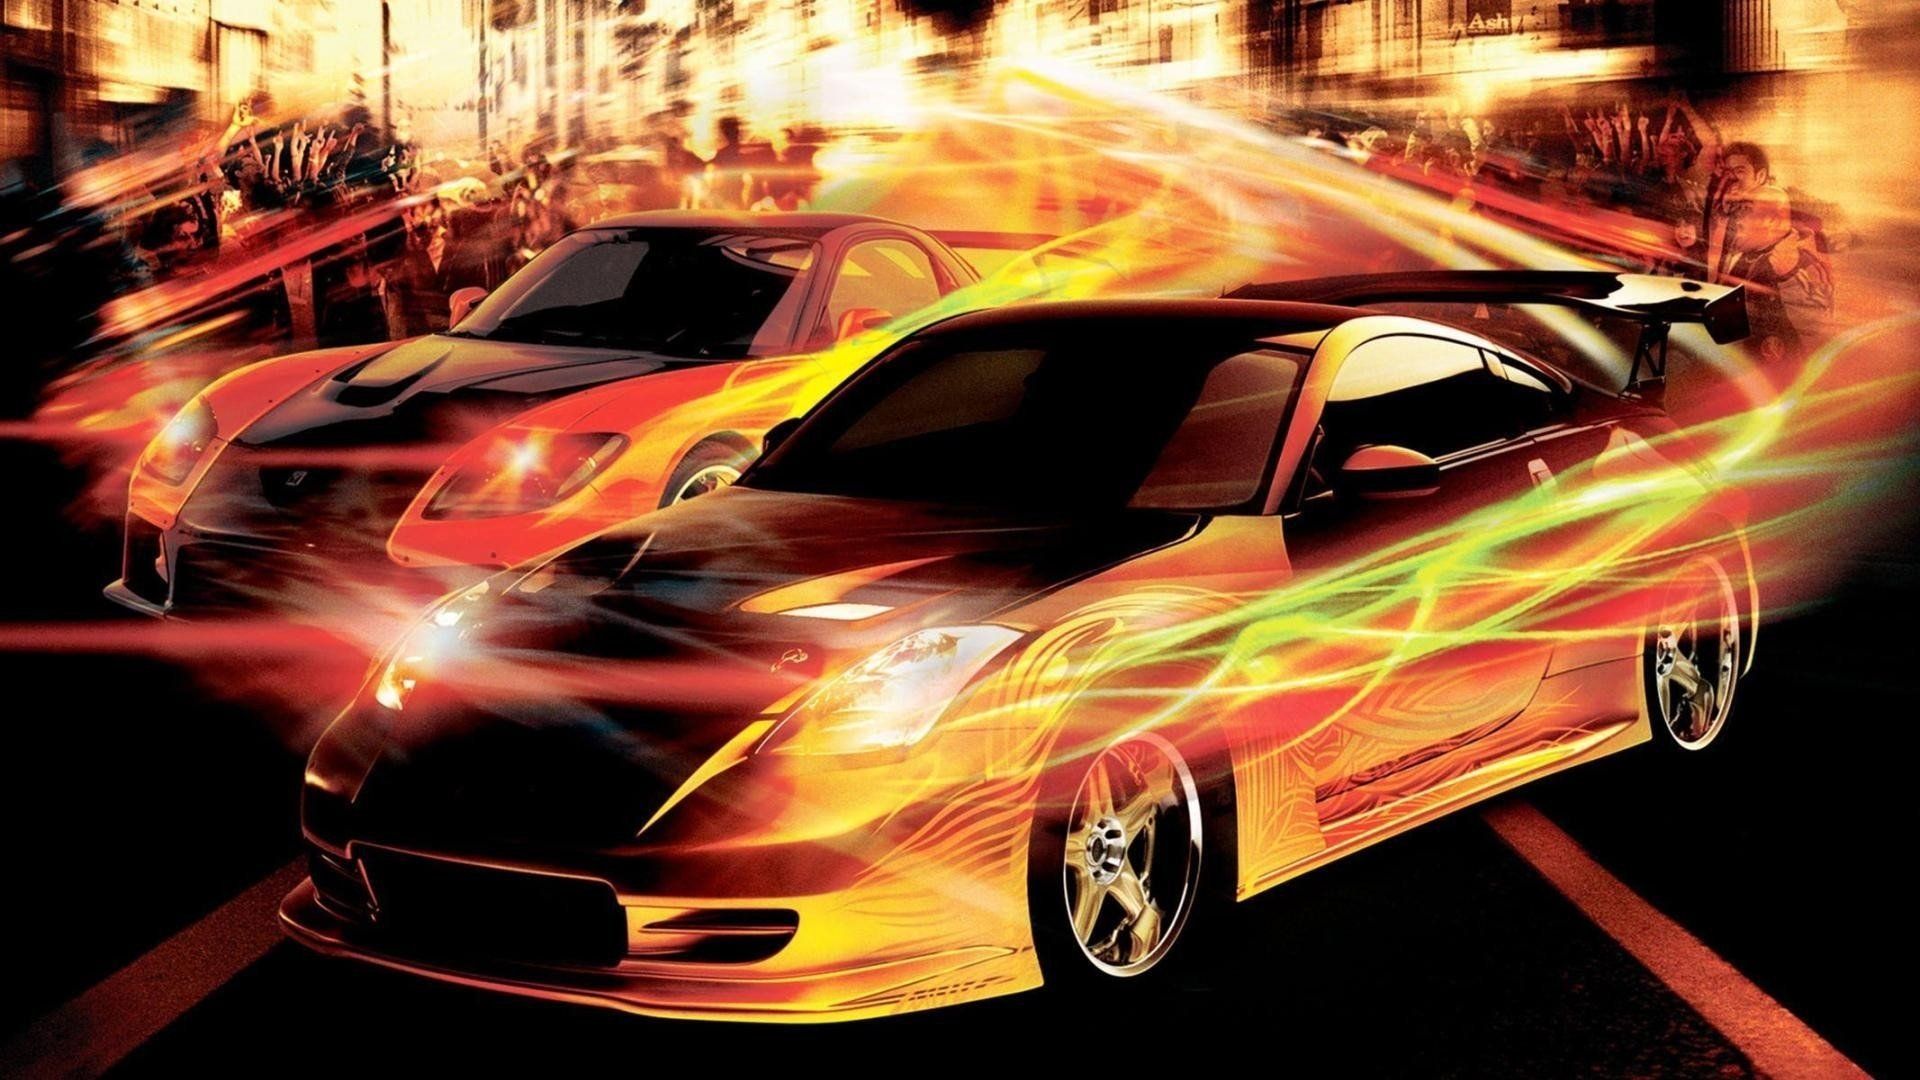 The Fast And The Furious: Tokyo Drift HD Wallpaper and Background Image